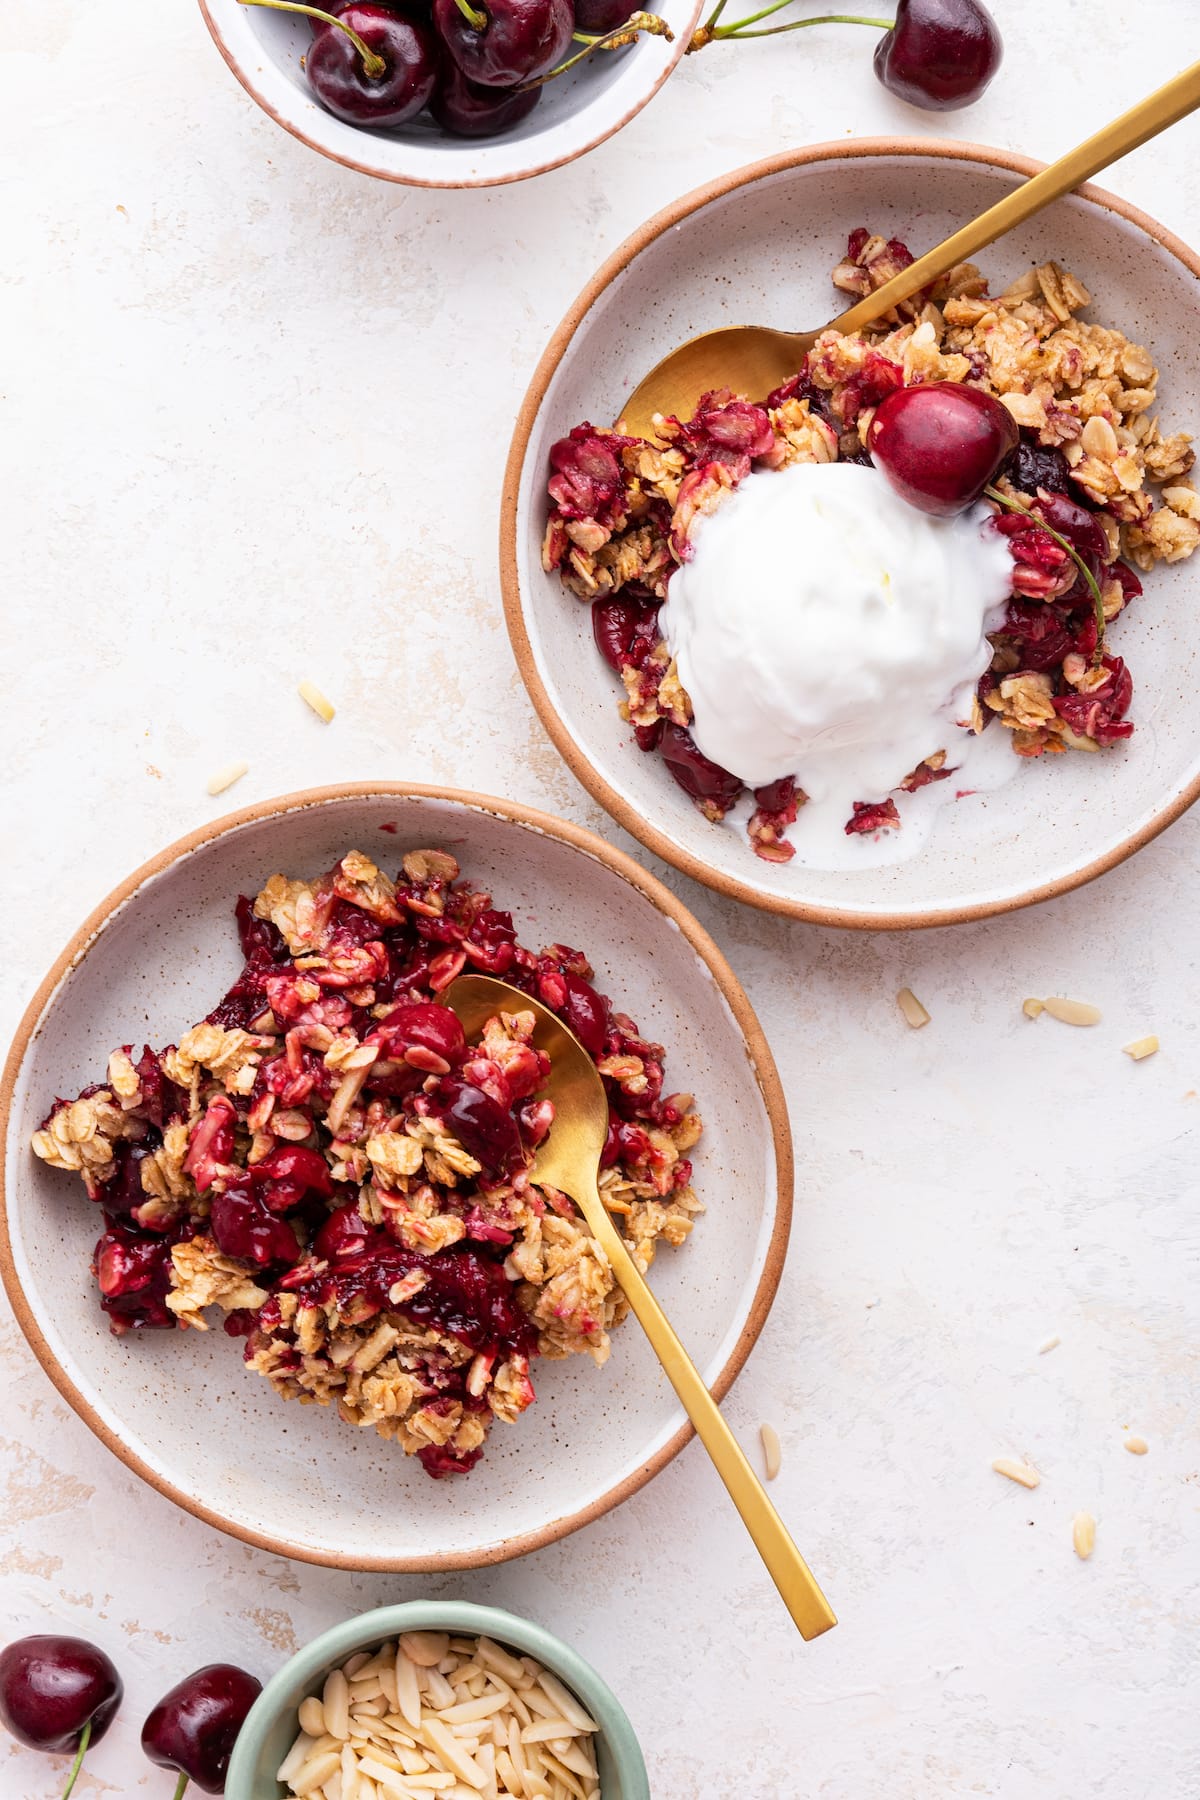 Two small plates with servings of cherry crisp. One plate has a scoop of ice cream with a whole cherry on top, while the other plate contains only the cherry crisp.